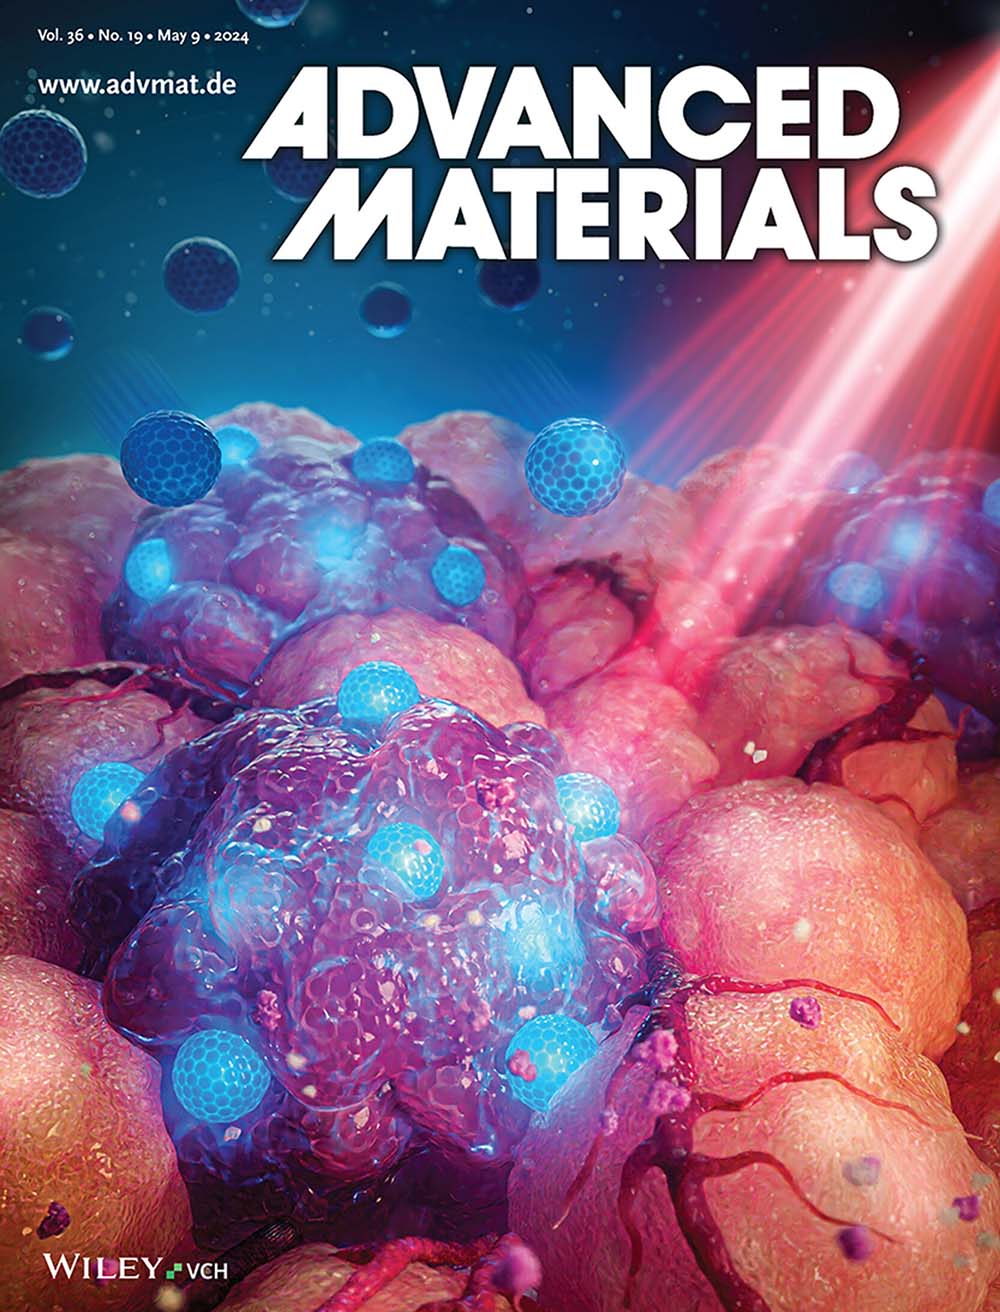 Journal cover on Advanced Materials